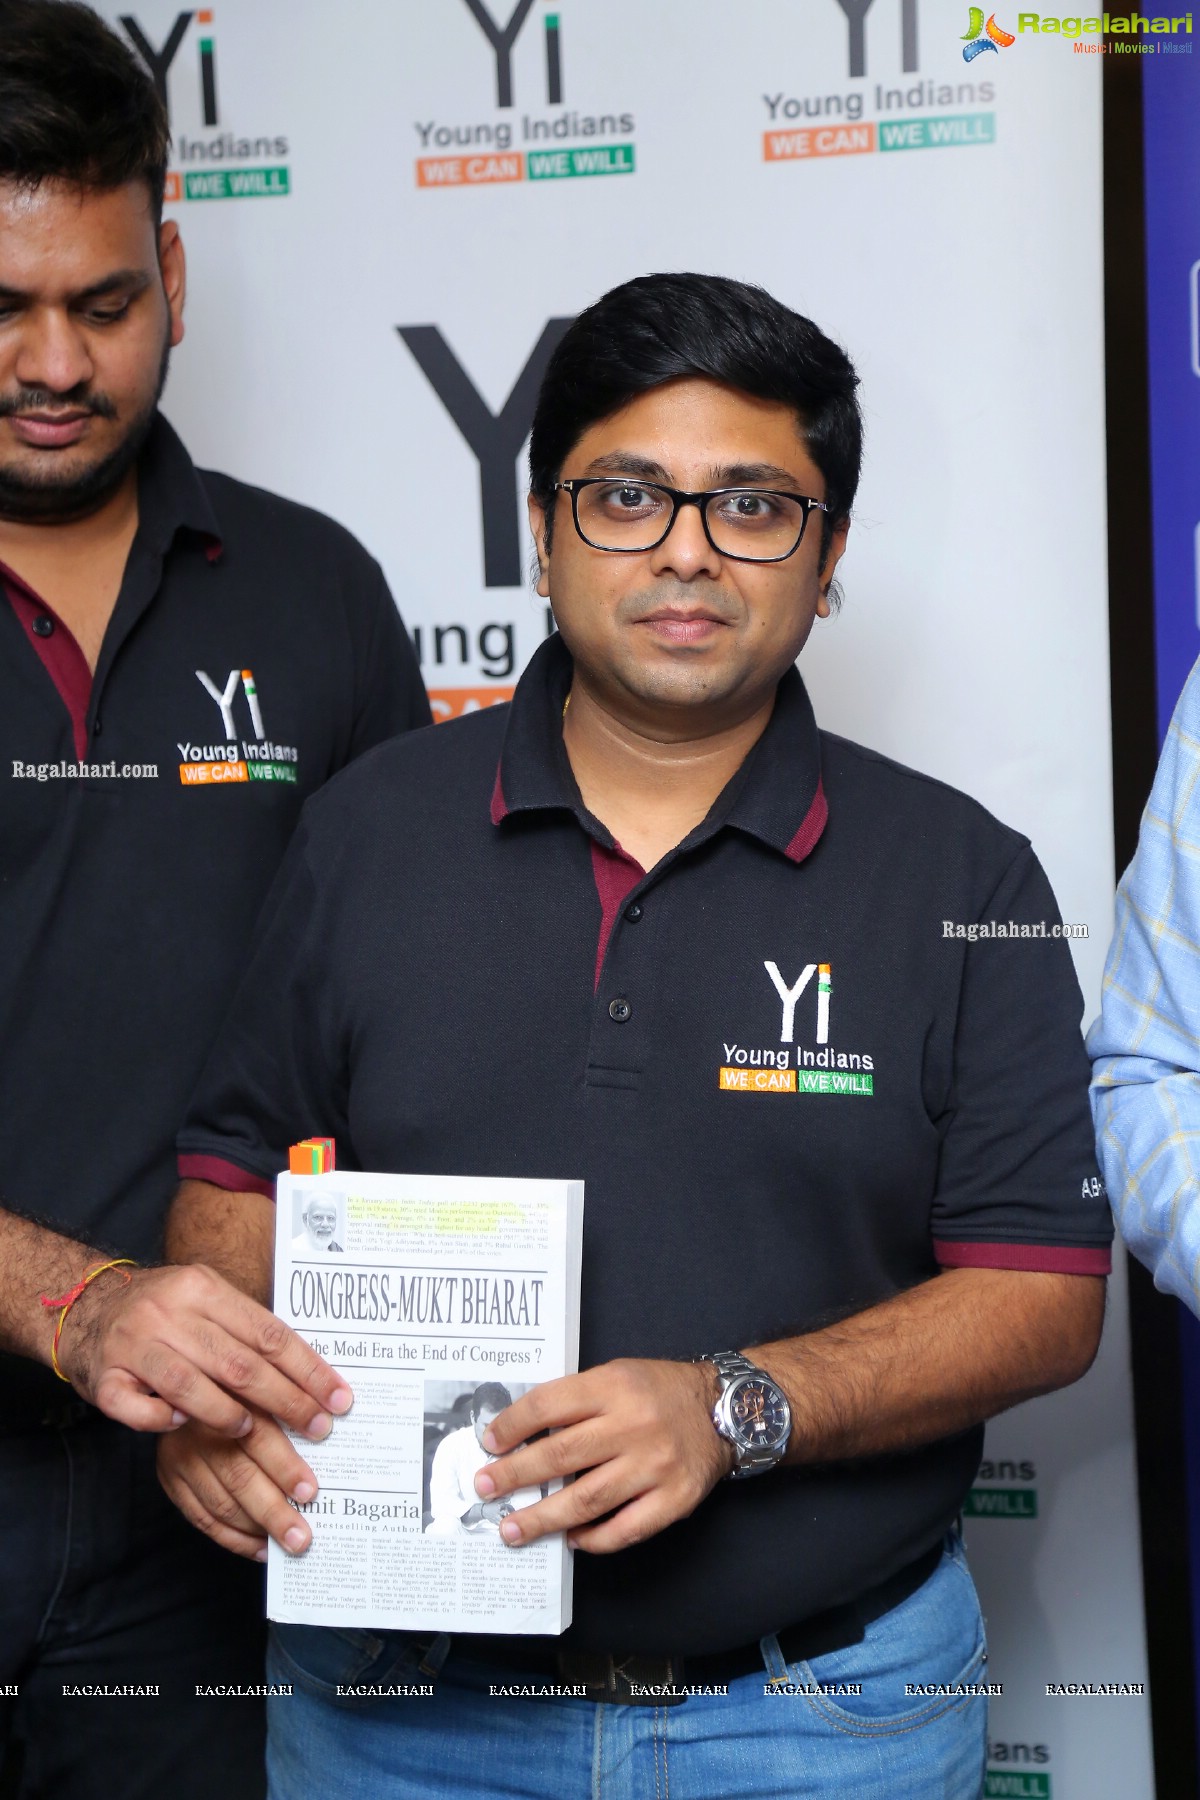 Yi (Young Indians) Hyderabad Chapter Presents Fireside Chat on ‘Indian Political Scenario’